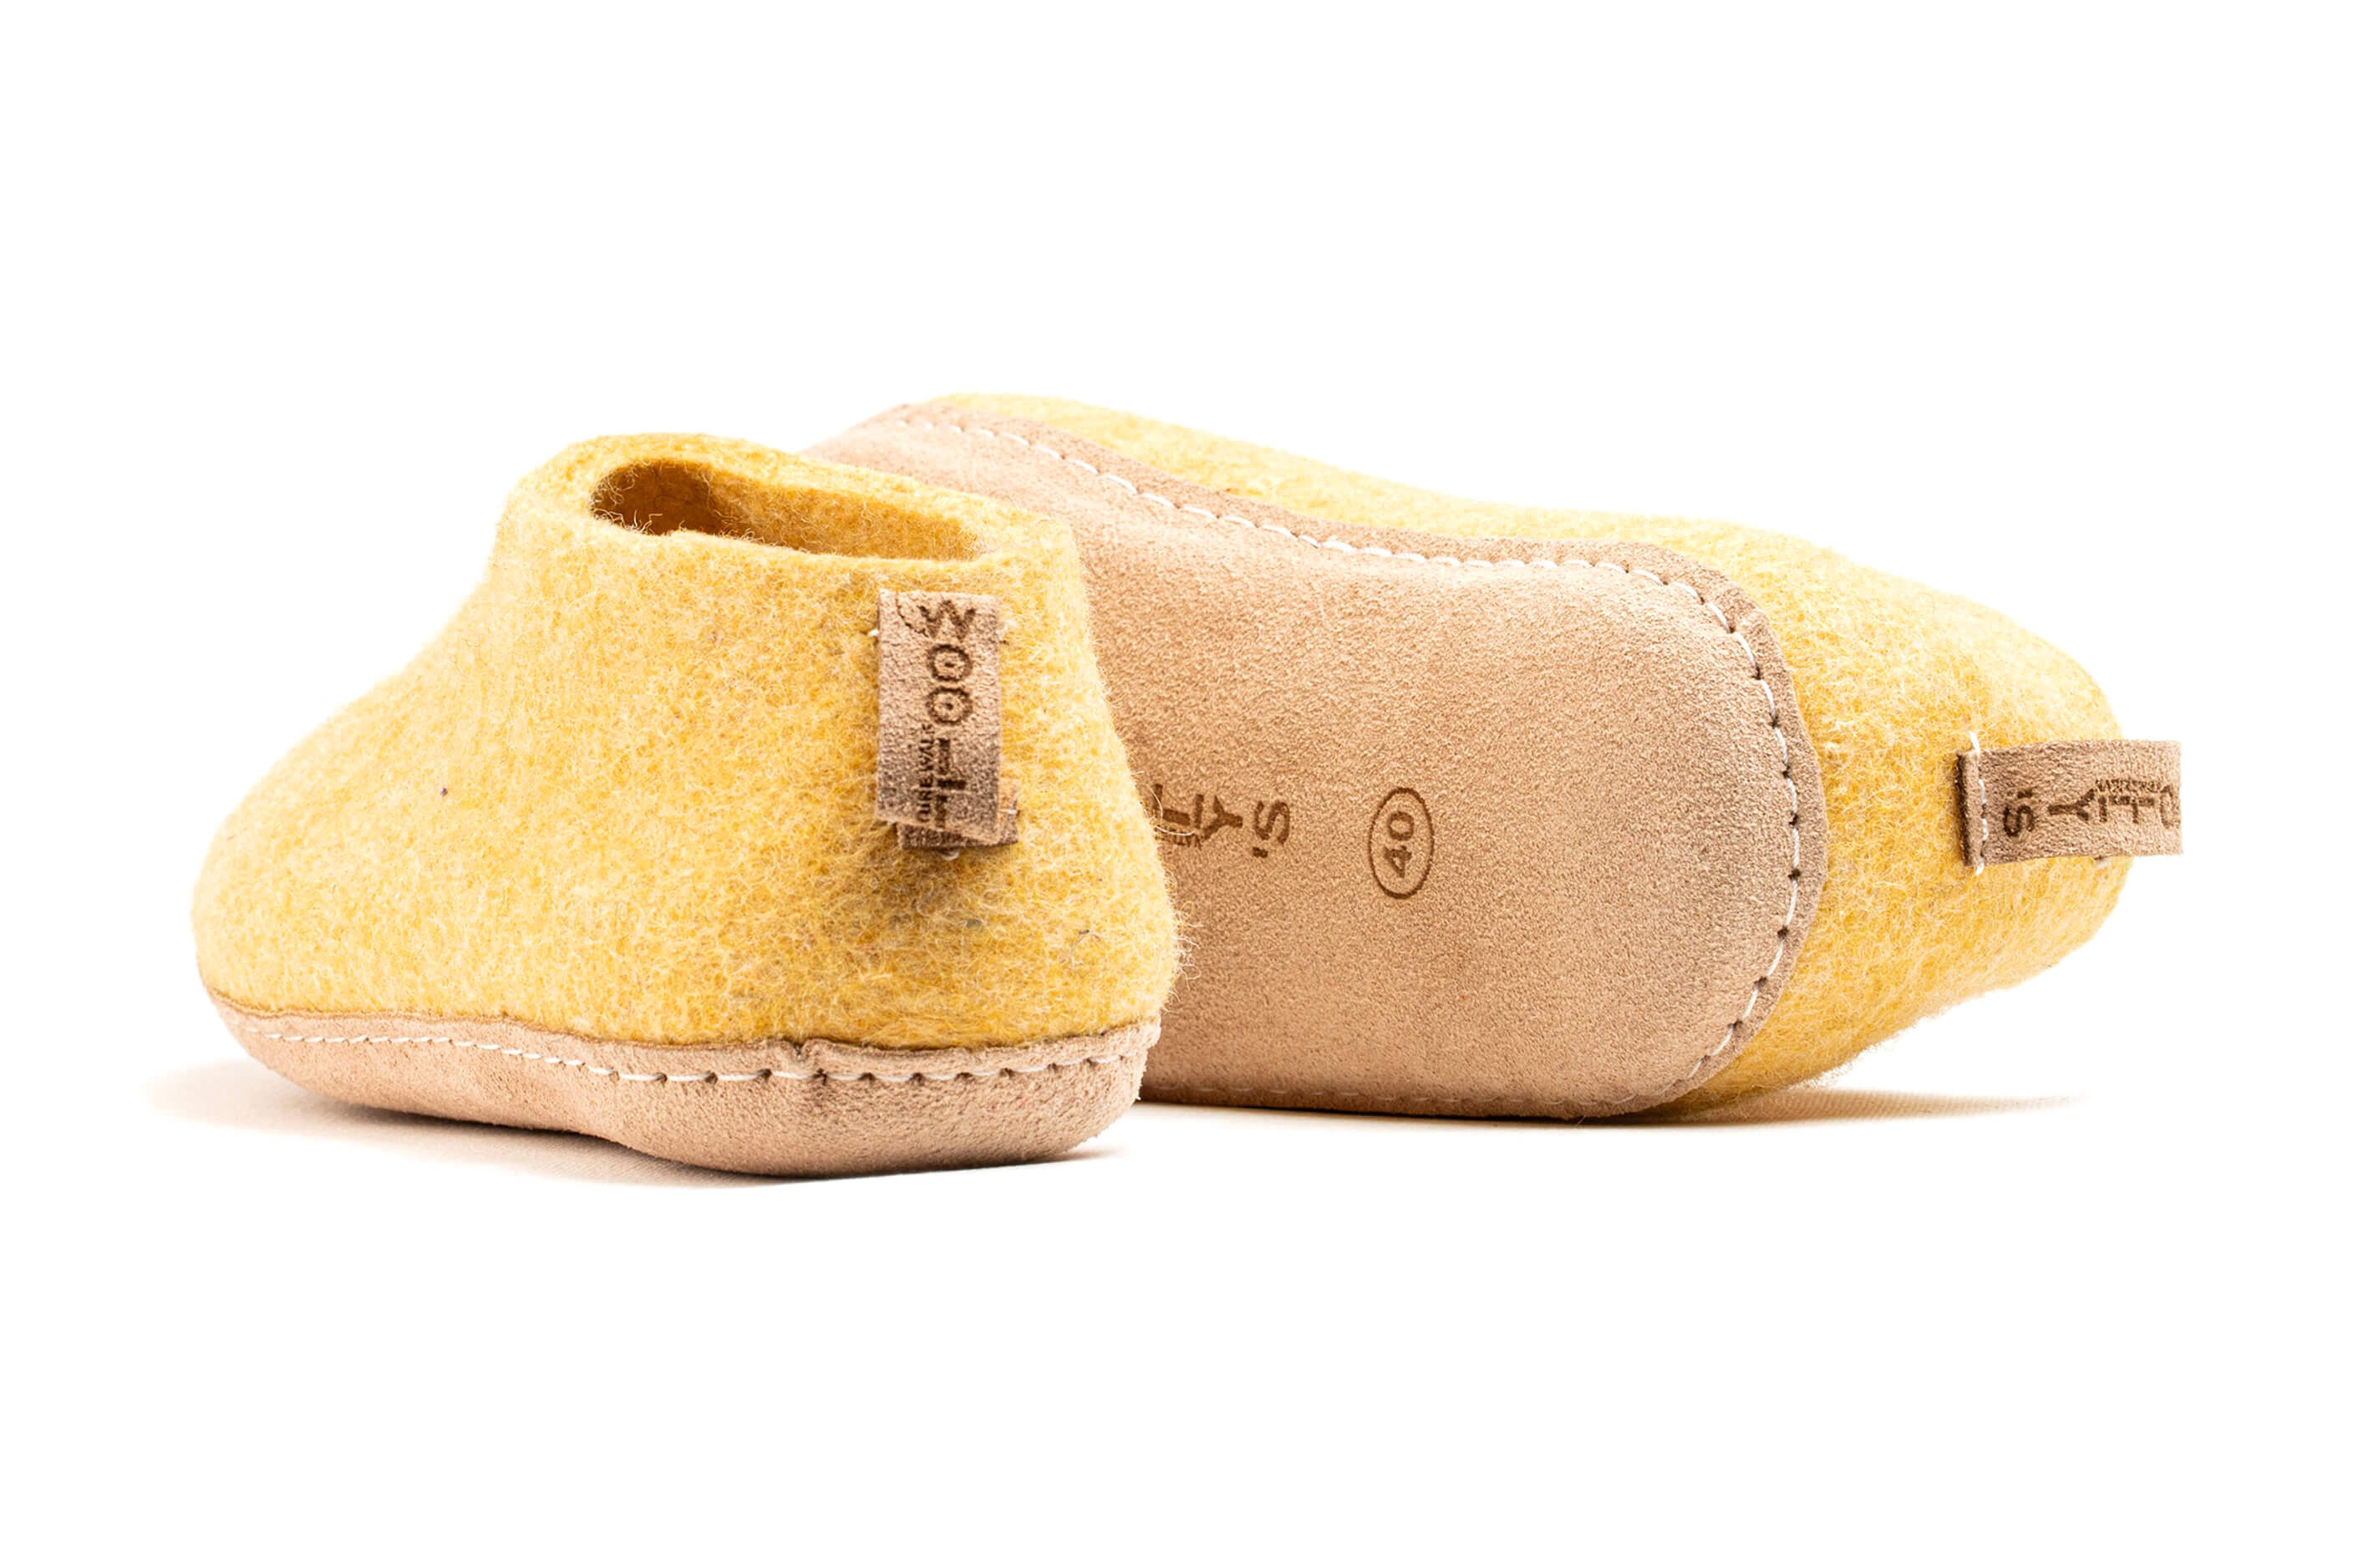 Indoor Shoes With Leather Sole - Mustard